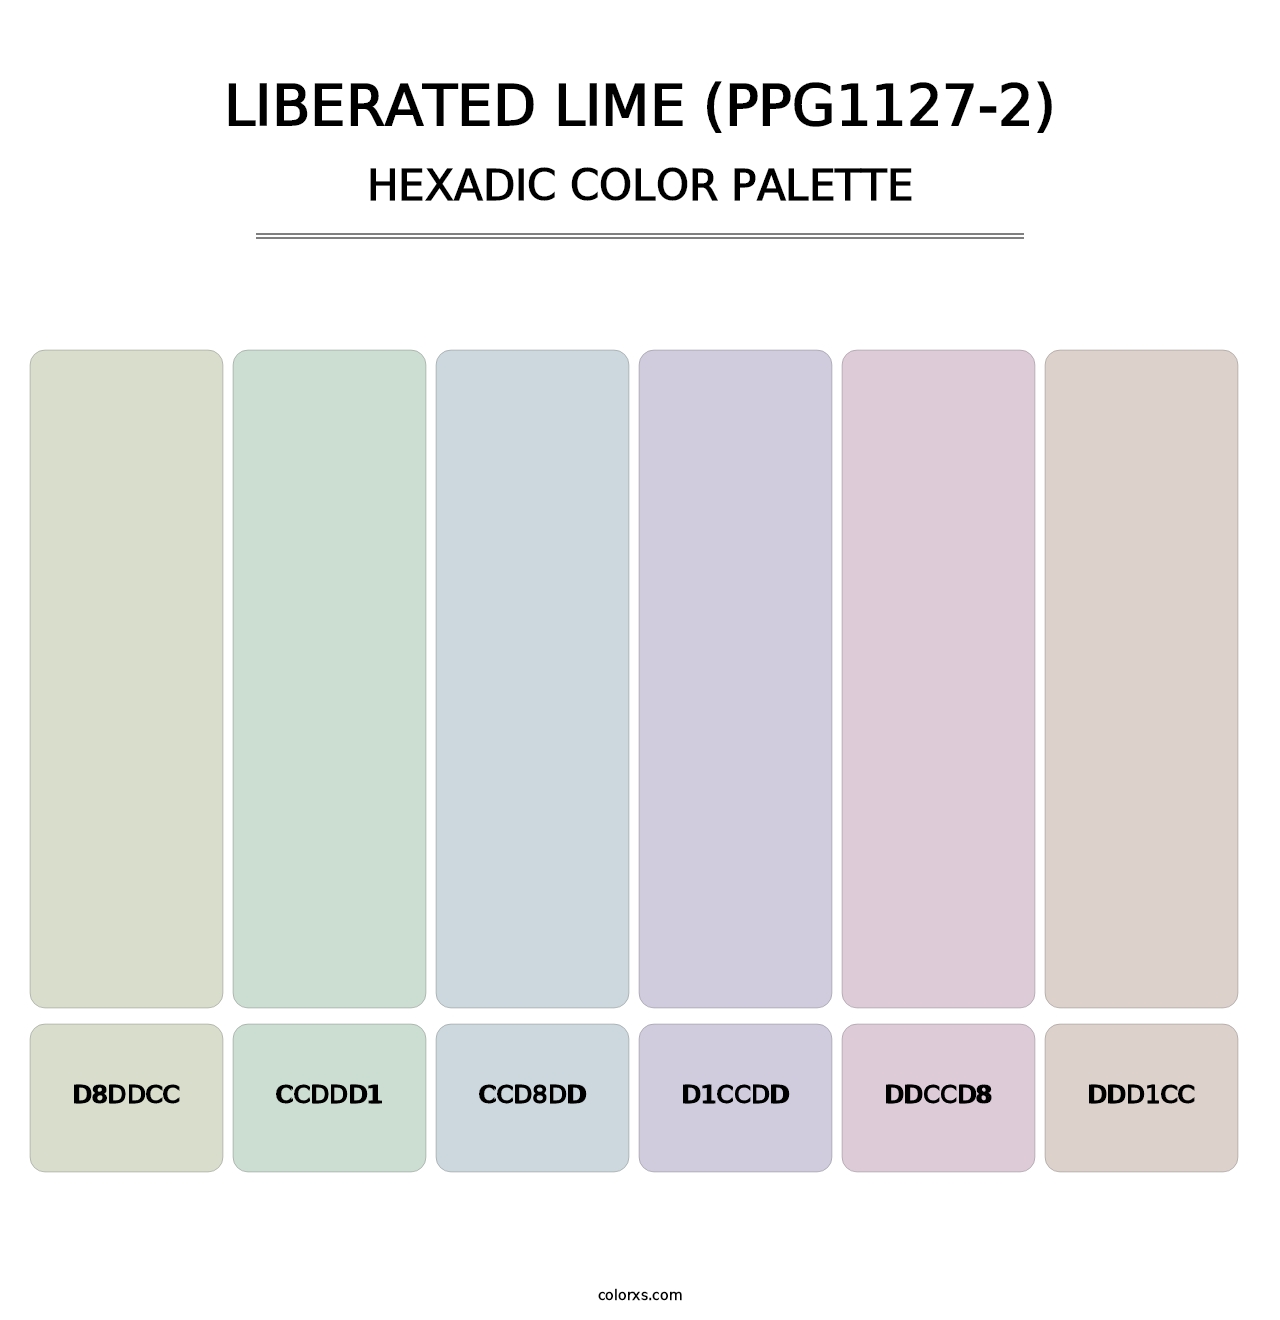 Liberated Lime (PPG1127-2) - Hexadic Color Palette